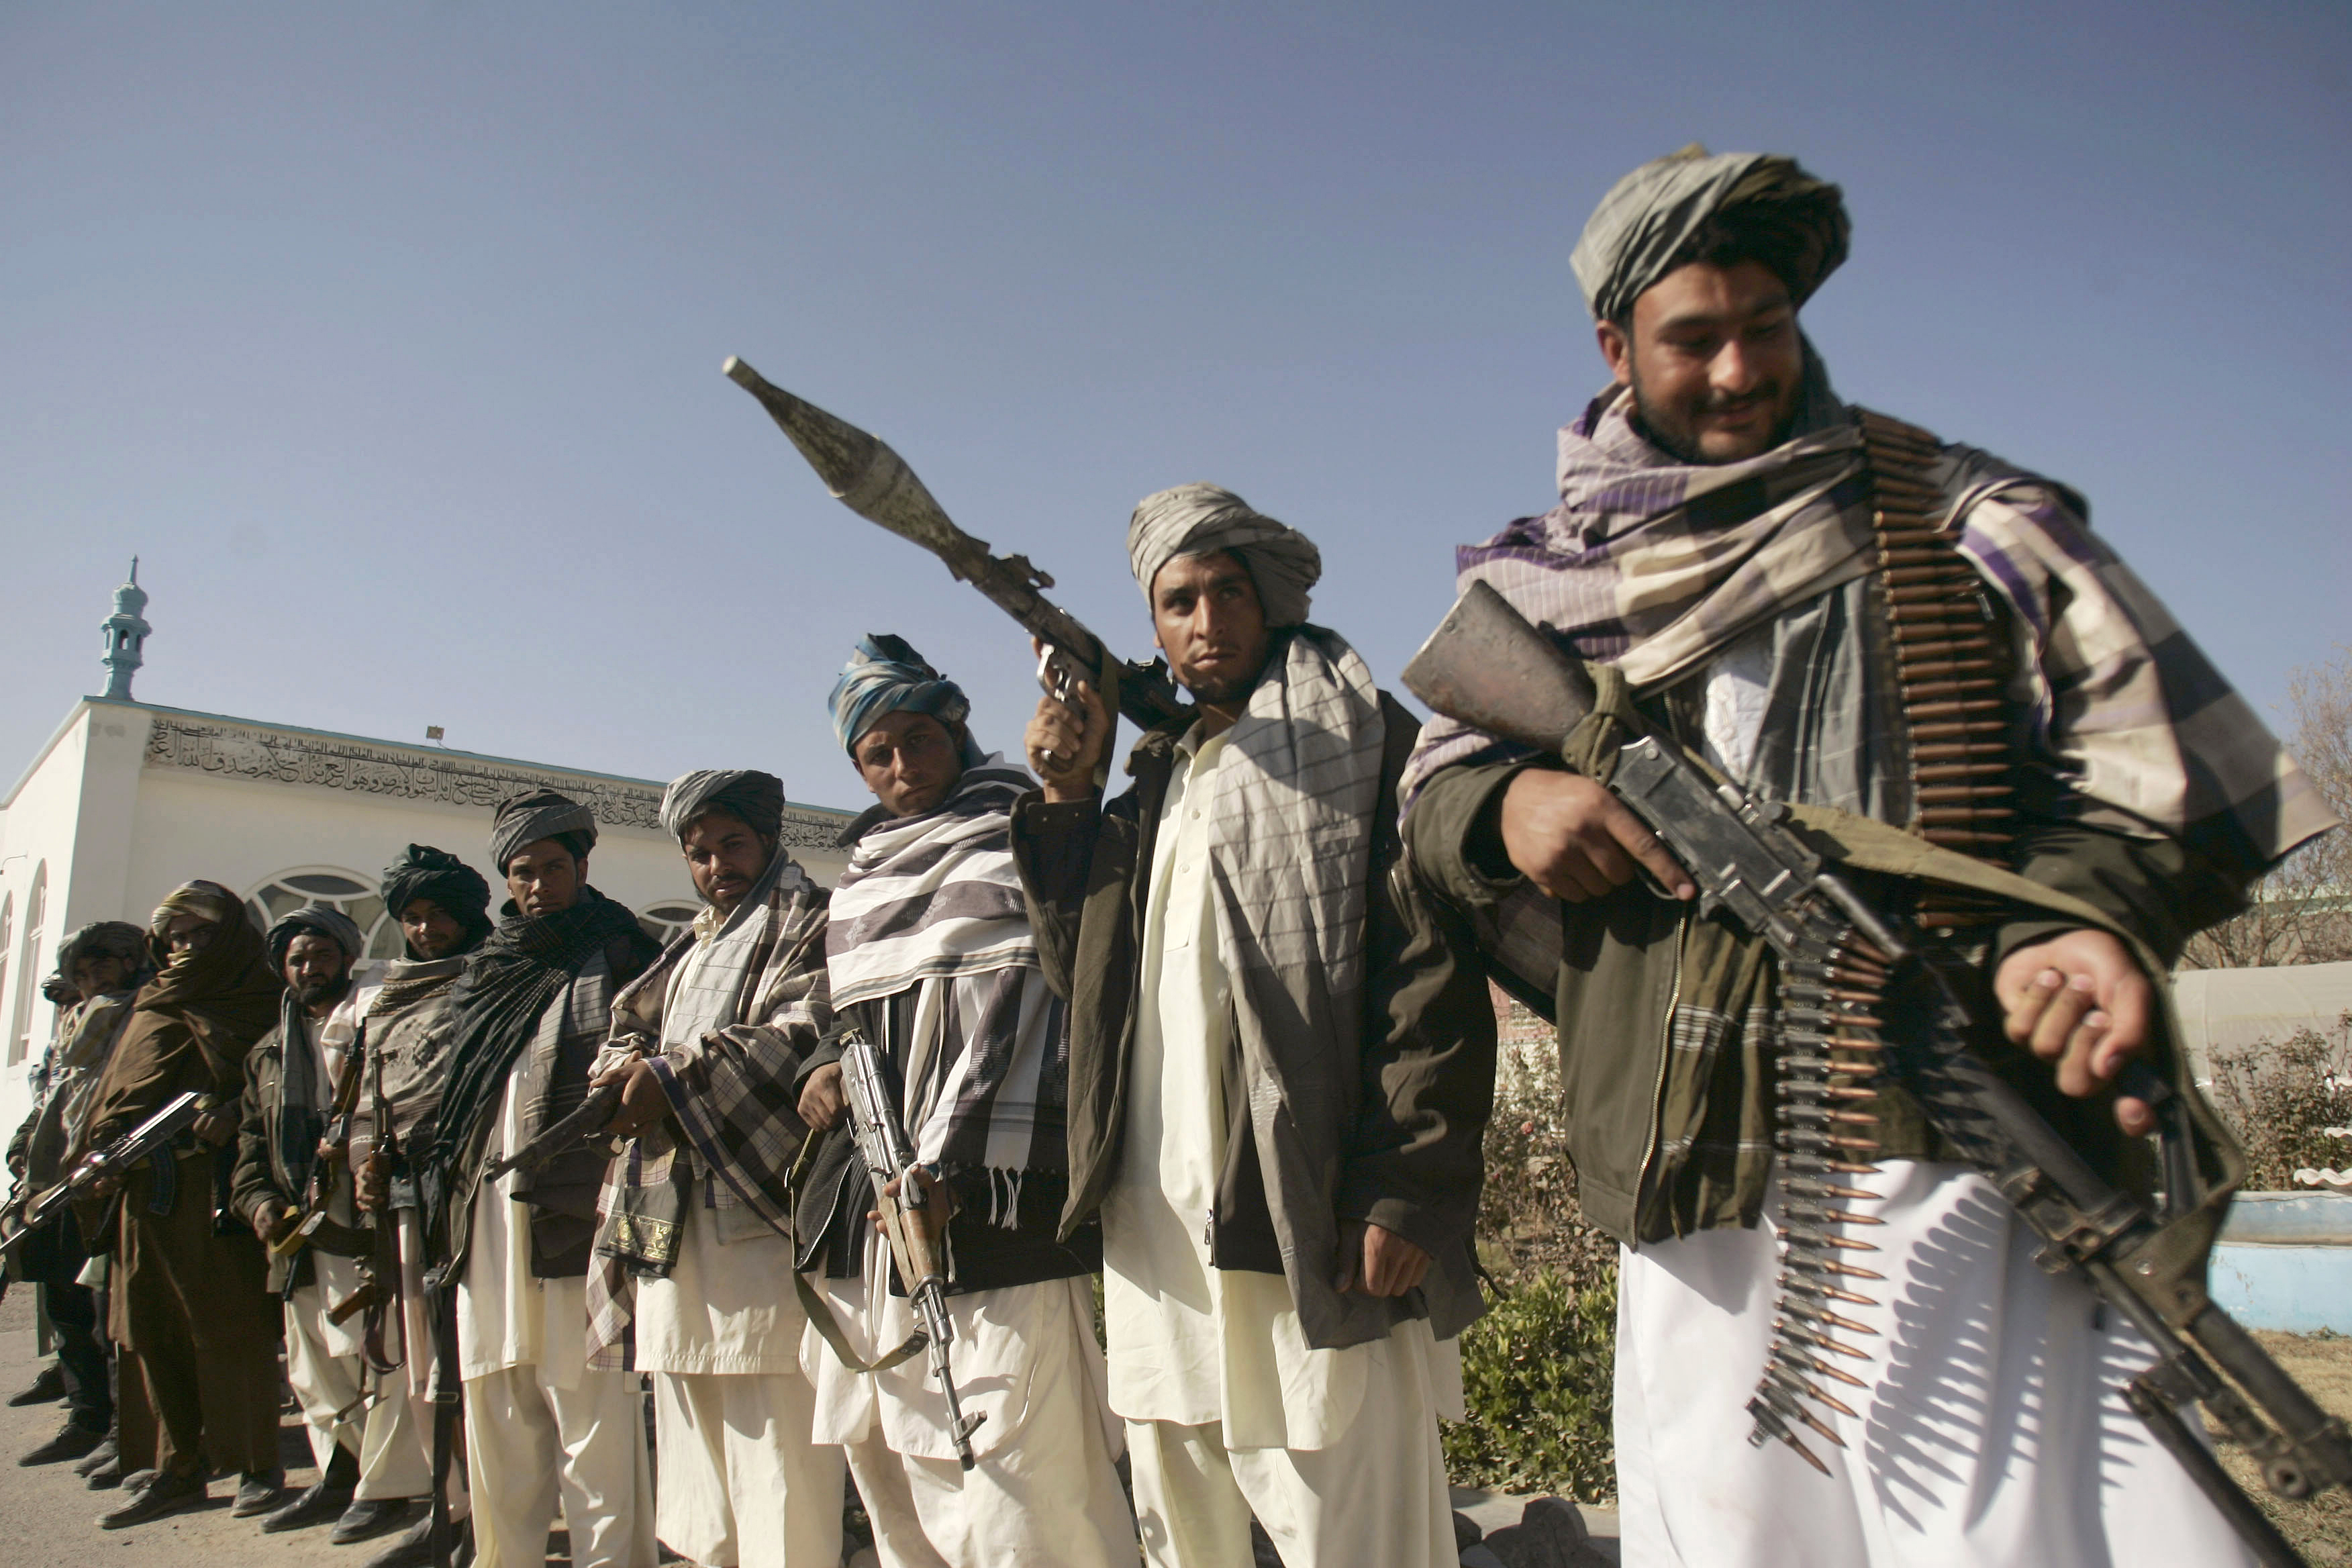 Russia is believed to have limited contacts with the Taliban.